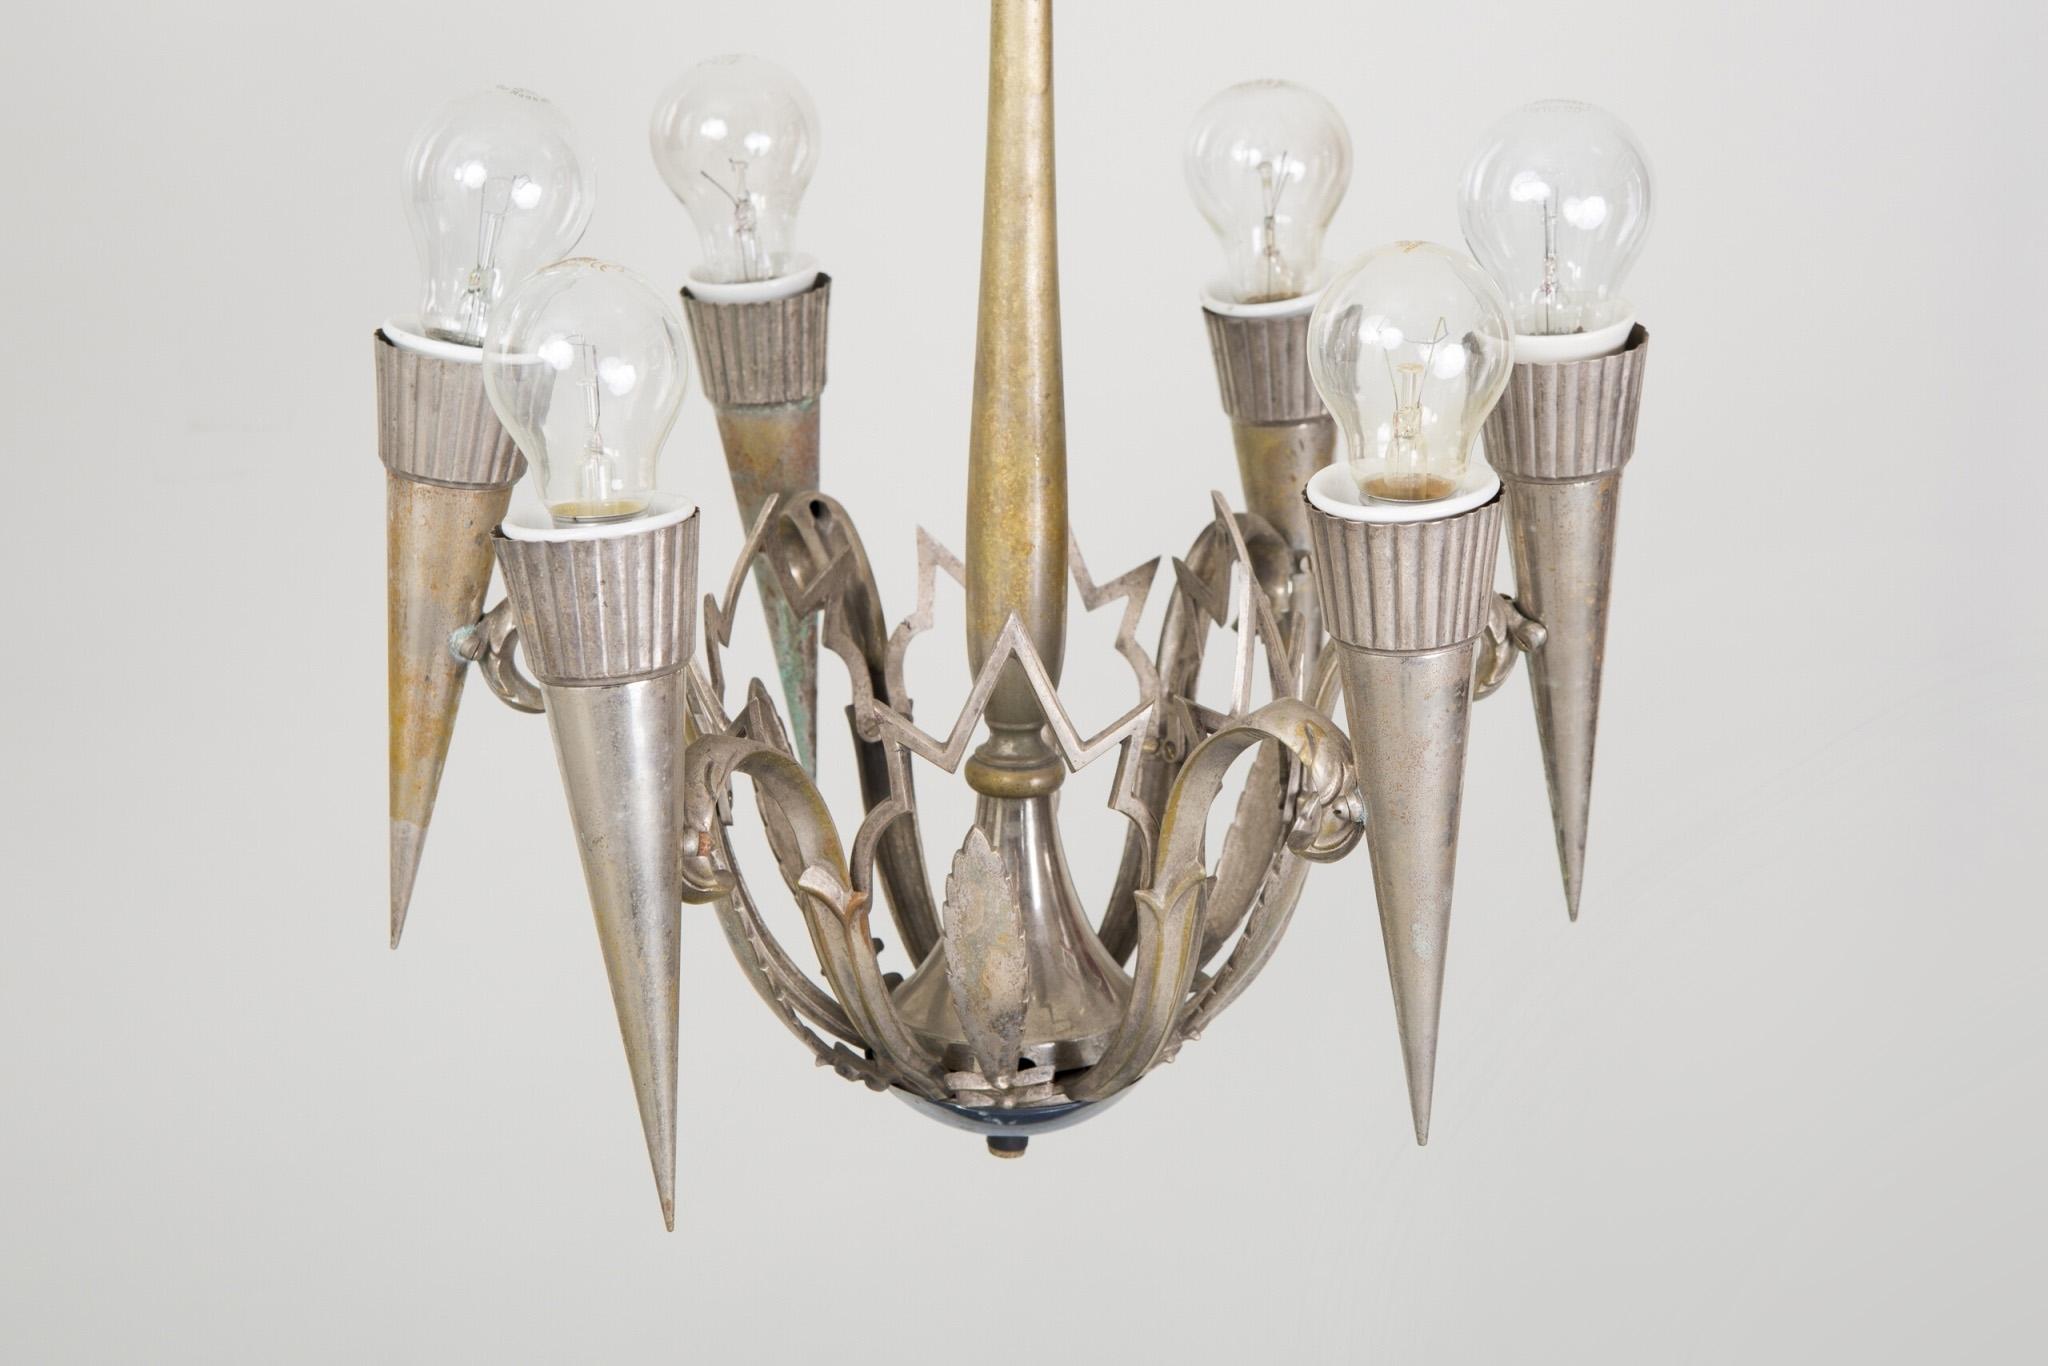 Franta Anyz chandelier made out of nickel plated brass in the 1920s
Original pristine condition. No damages.
Rare design.

We guarantee safe a the cheapest air transport from Europe to the whole world within 7 days.
The price is the same as for